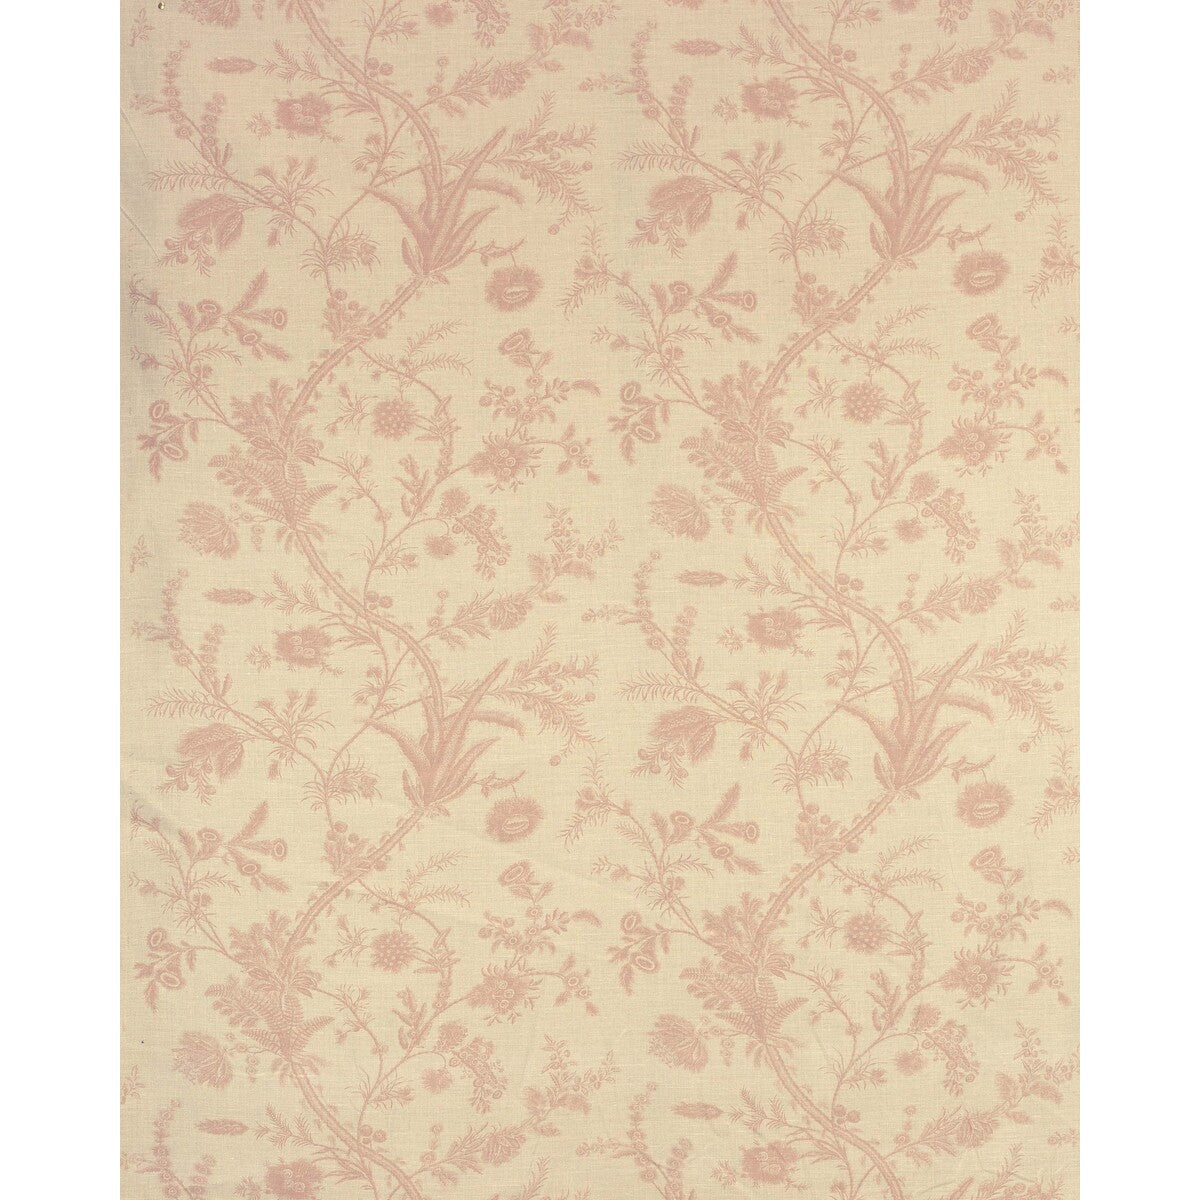 Plumes fabric in antique pink color - pattern 2022123.716.0 - by Lee Jofa in the Paolo Moschino Persepolis collection